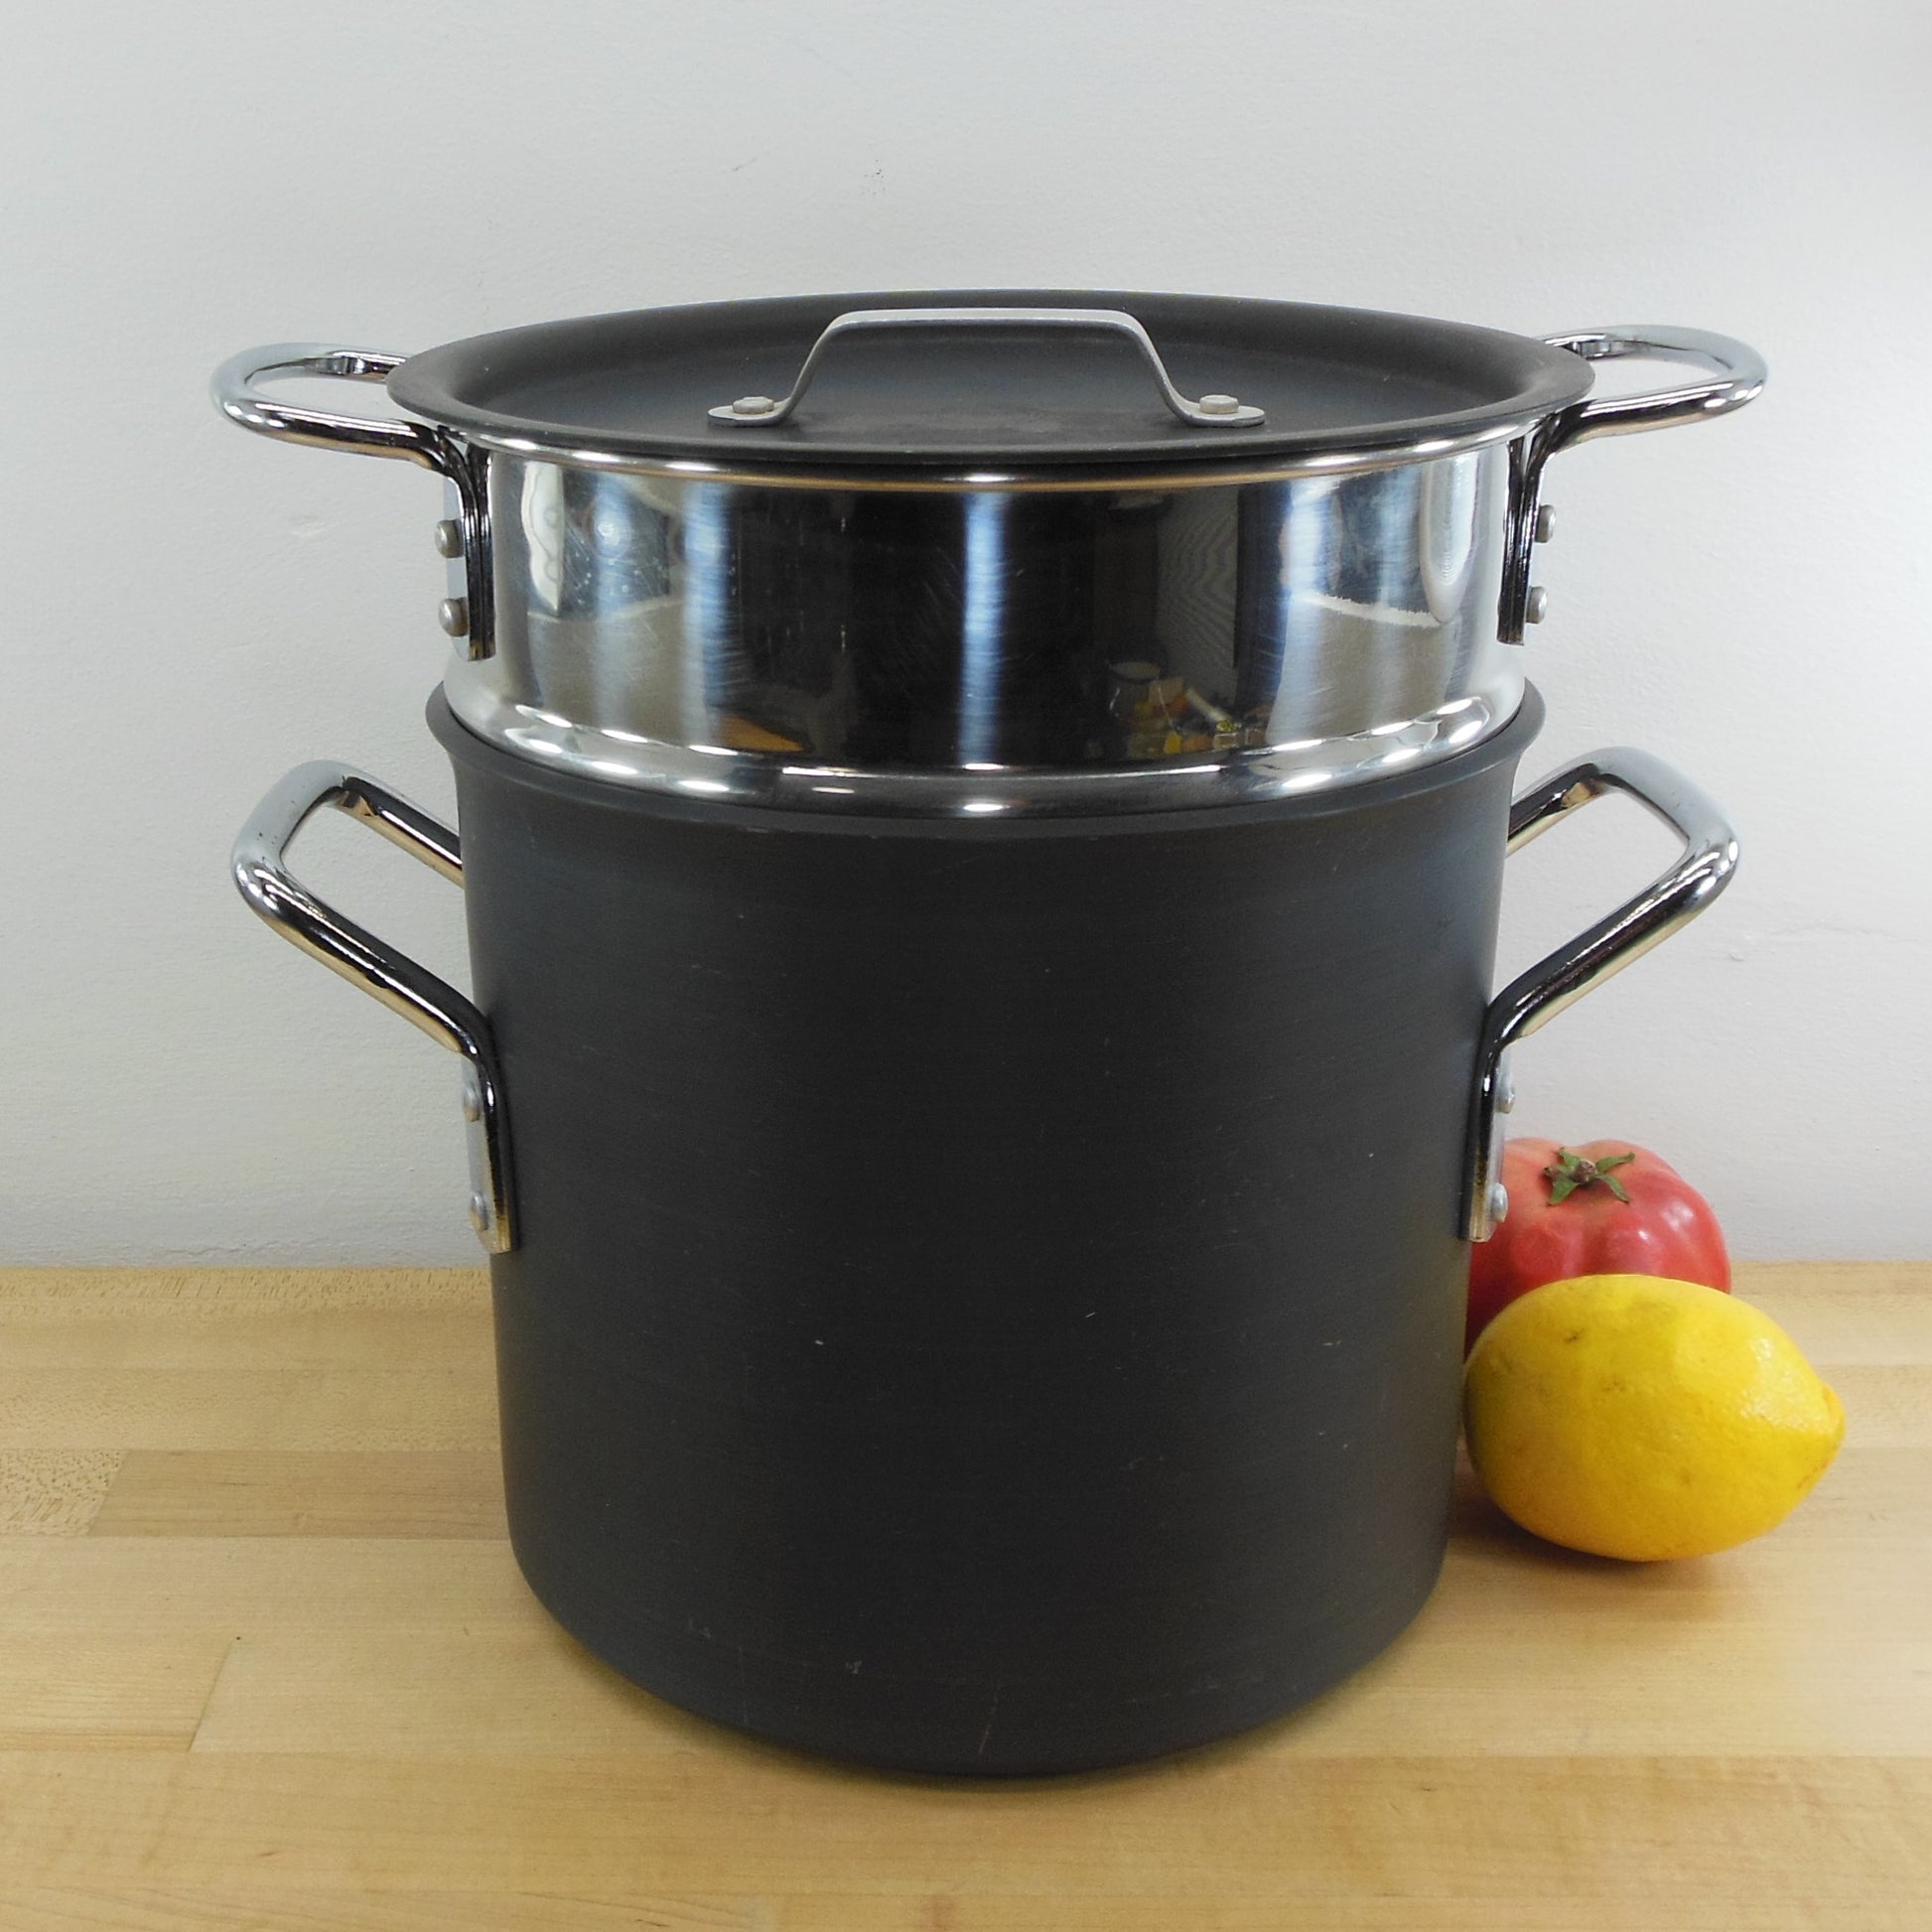 Calphalon Classic Stainless Steel 8 quart Stock Pot with Steamer and Pasta  Insert